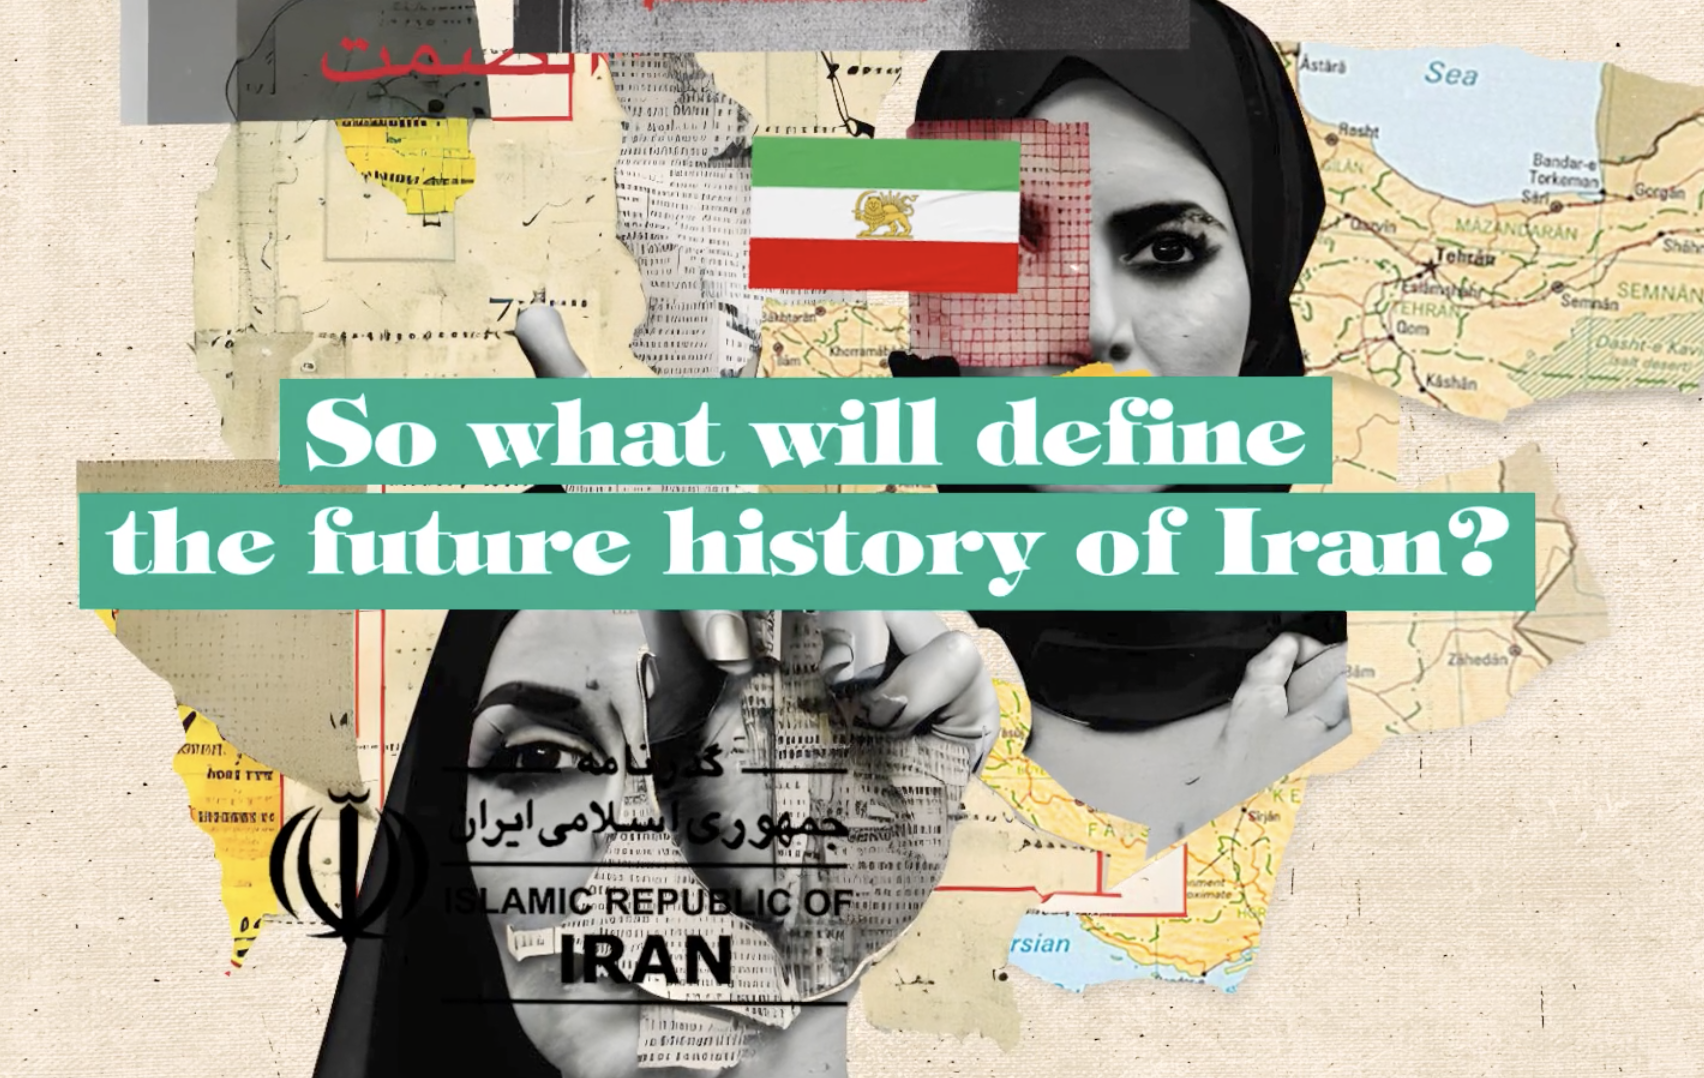 collage editorial style image that includes faces of two women and maps of Iran, overlayed with text that reads: So what will define the future history of Iran?